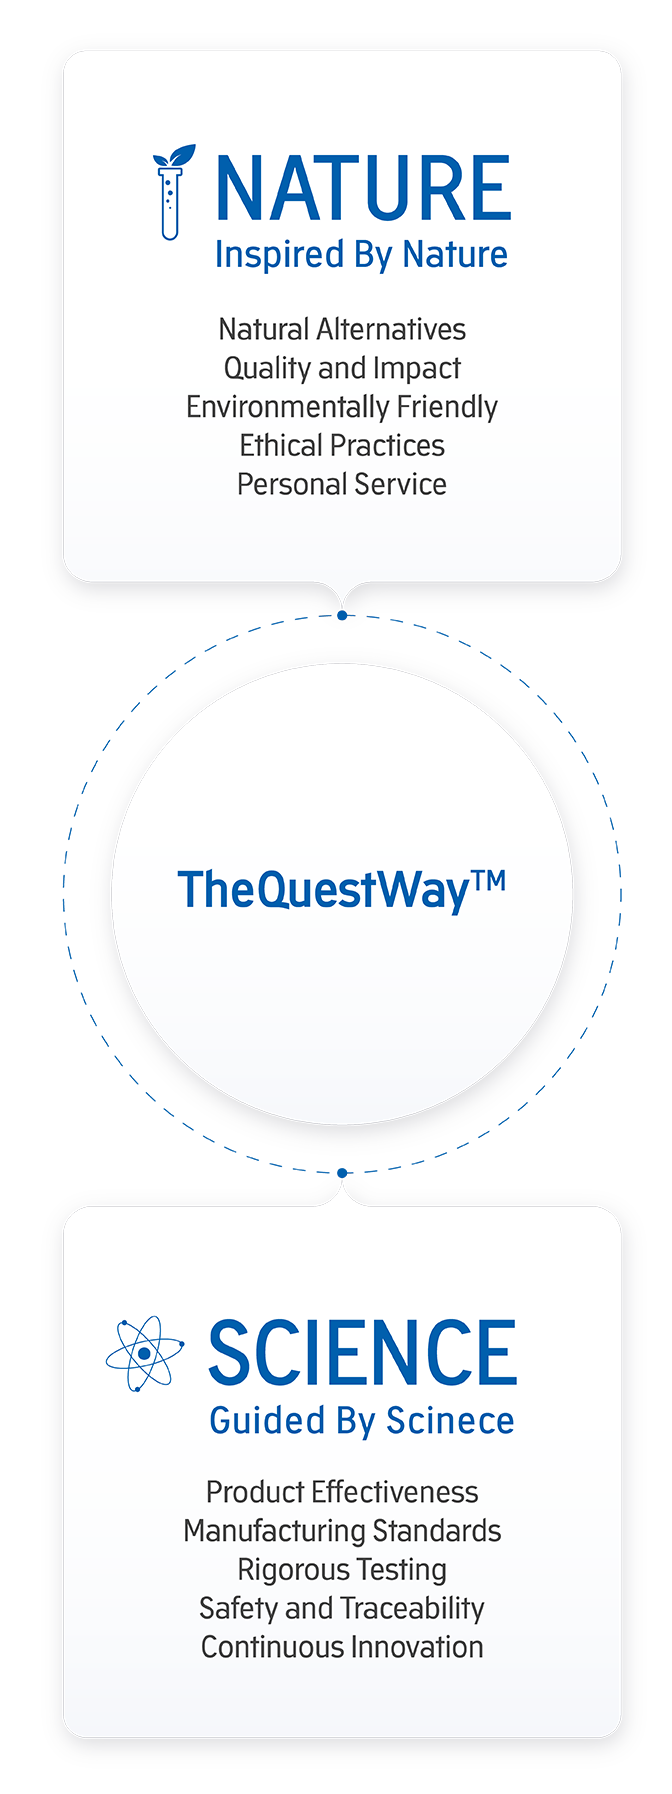 TheQuestway